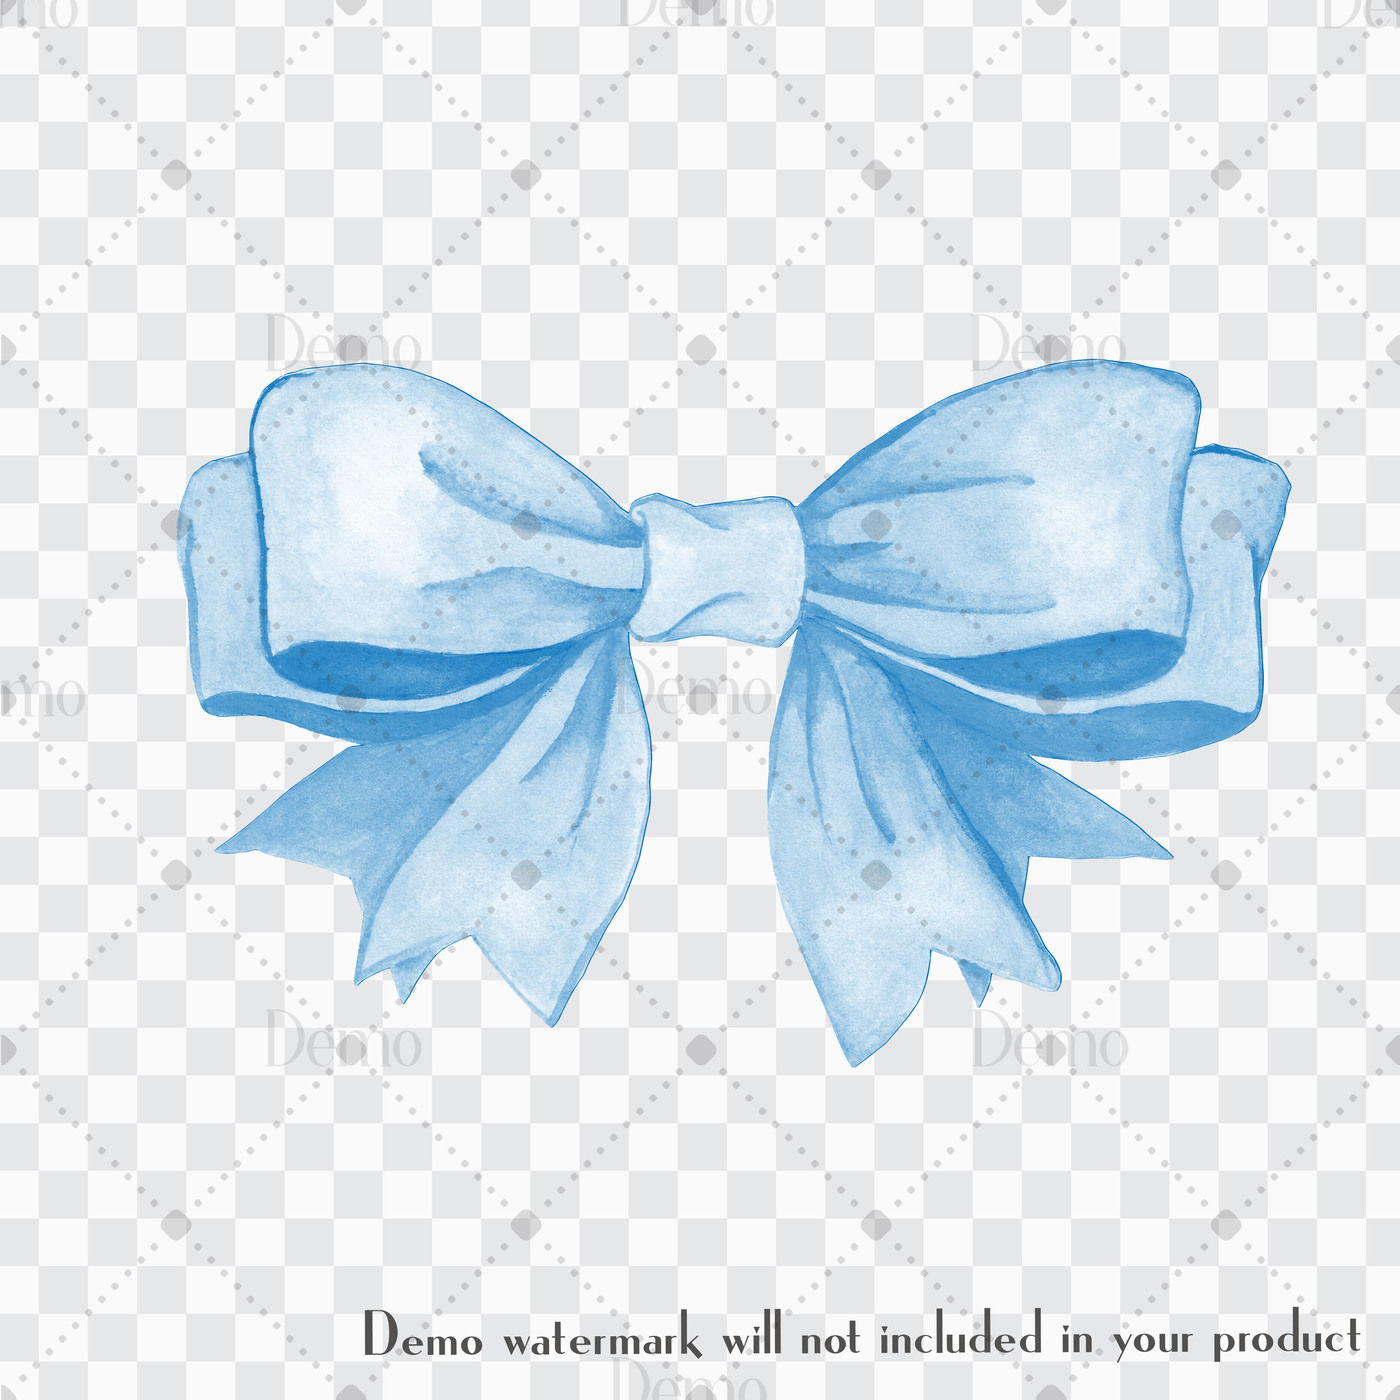 Ribbons and Bows Clip Art, Hand Drawn Bow PNG, Christmas Bow, Gift Bows,  Holiday Bows, Outline for Coloring, for Invitation, Holiday Cards -   Norway